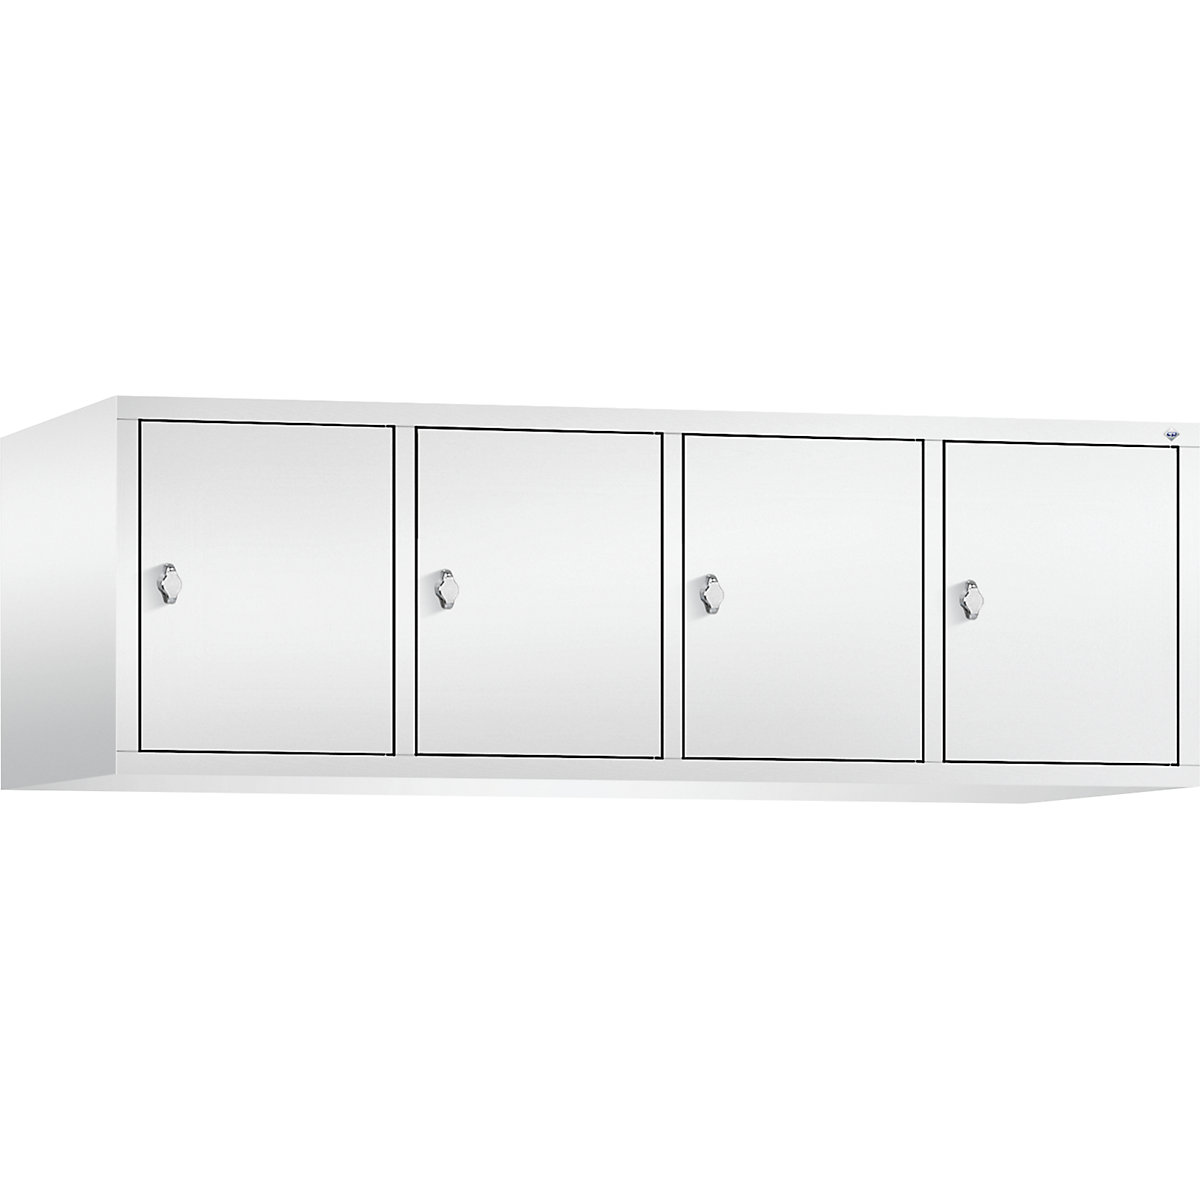 CLASSIC add-on cupboard – C+P, 4 compartments, compartment width 400 mm, traffic white-9